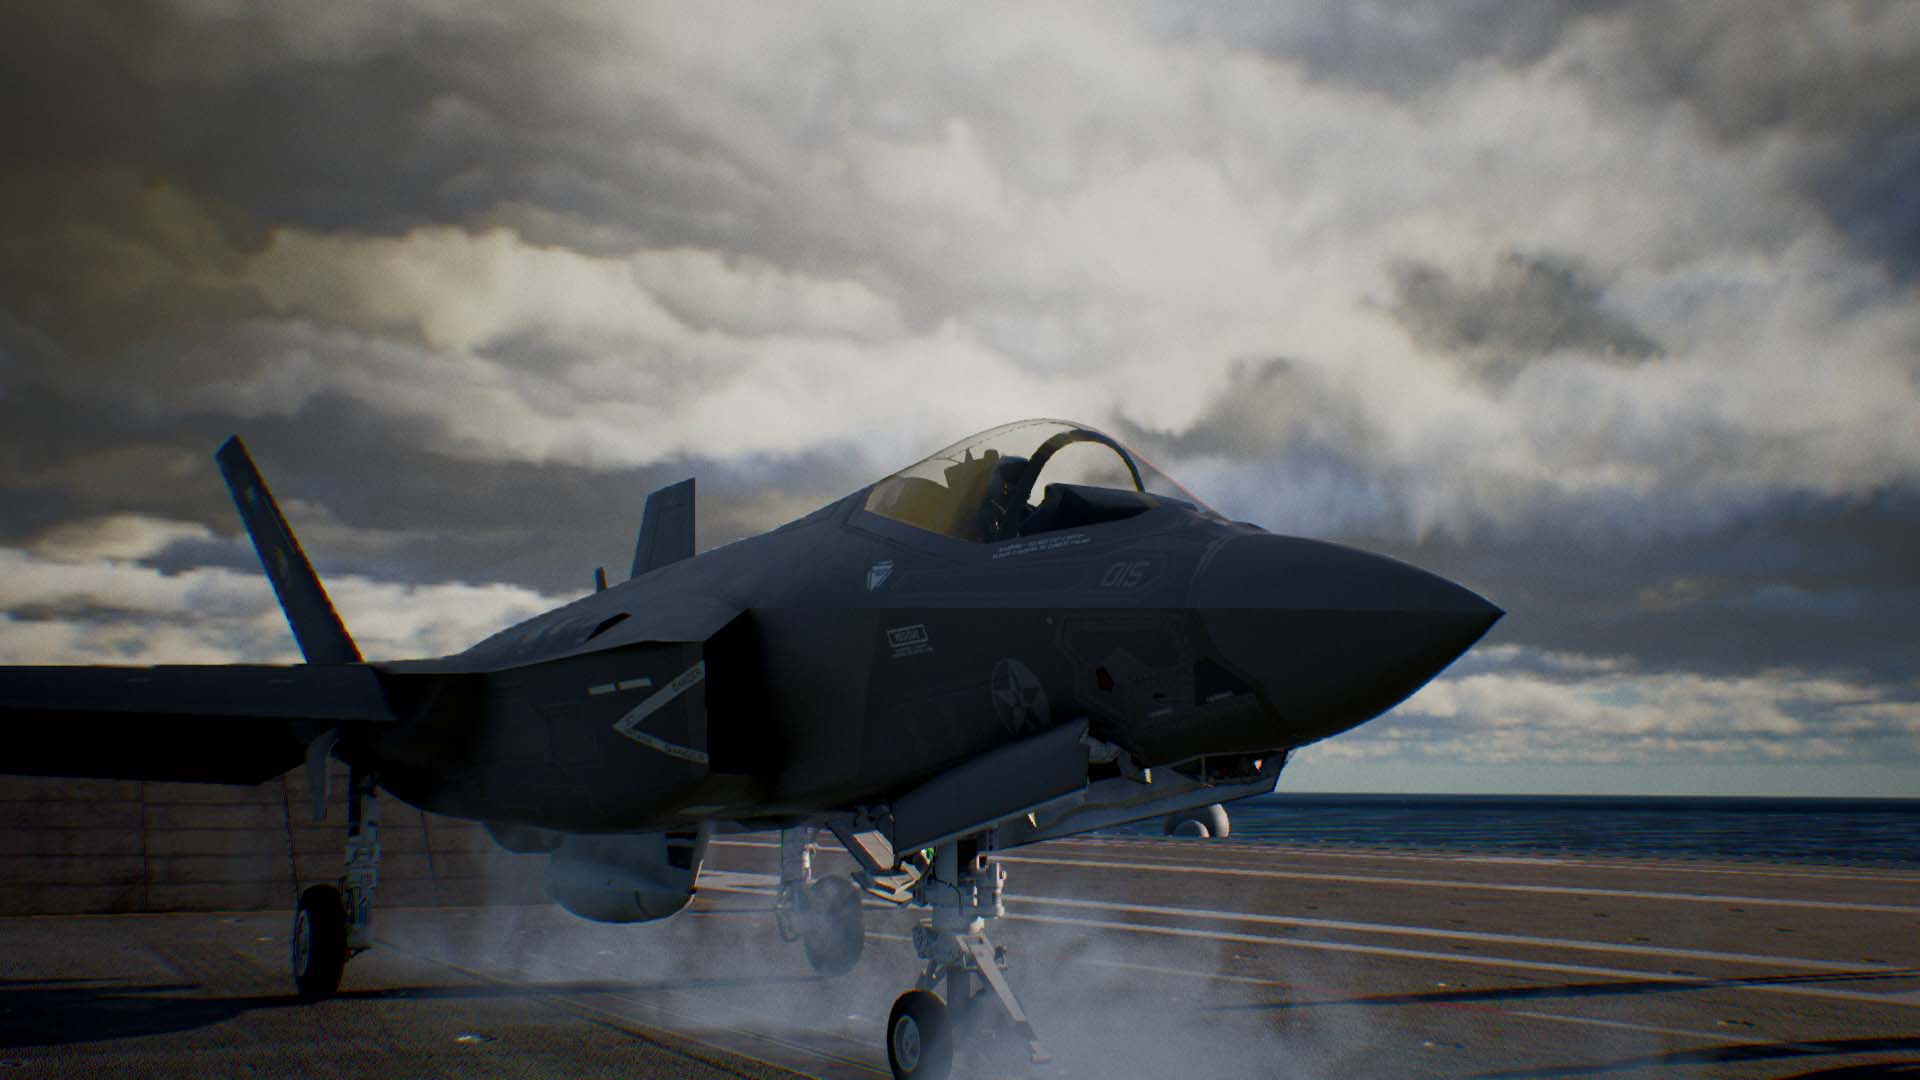 Gamescom 2017 Trailer and Screenshots for Ace Combat 7: Skies Unknown